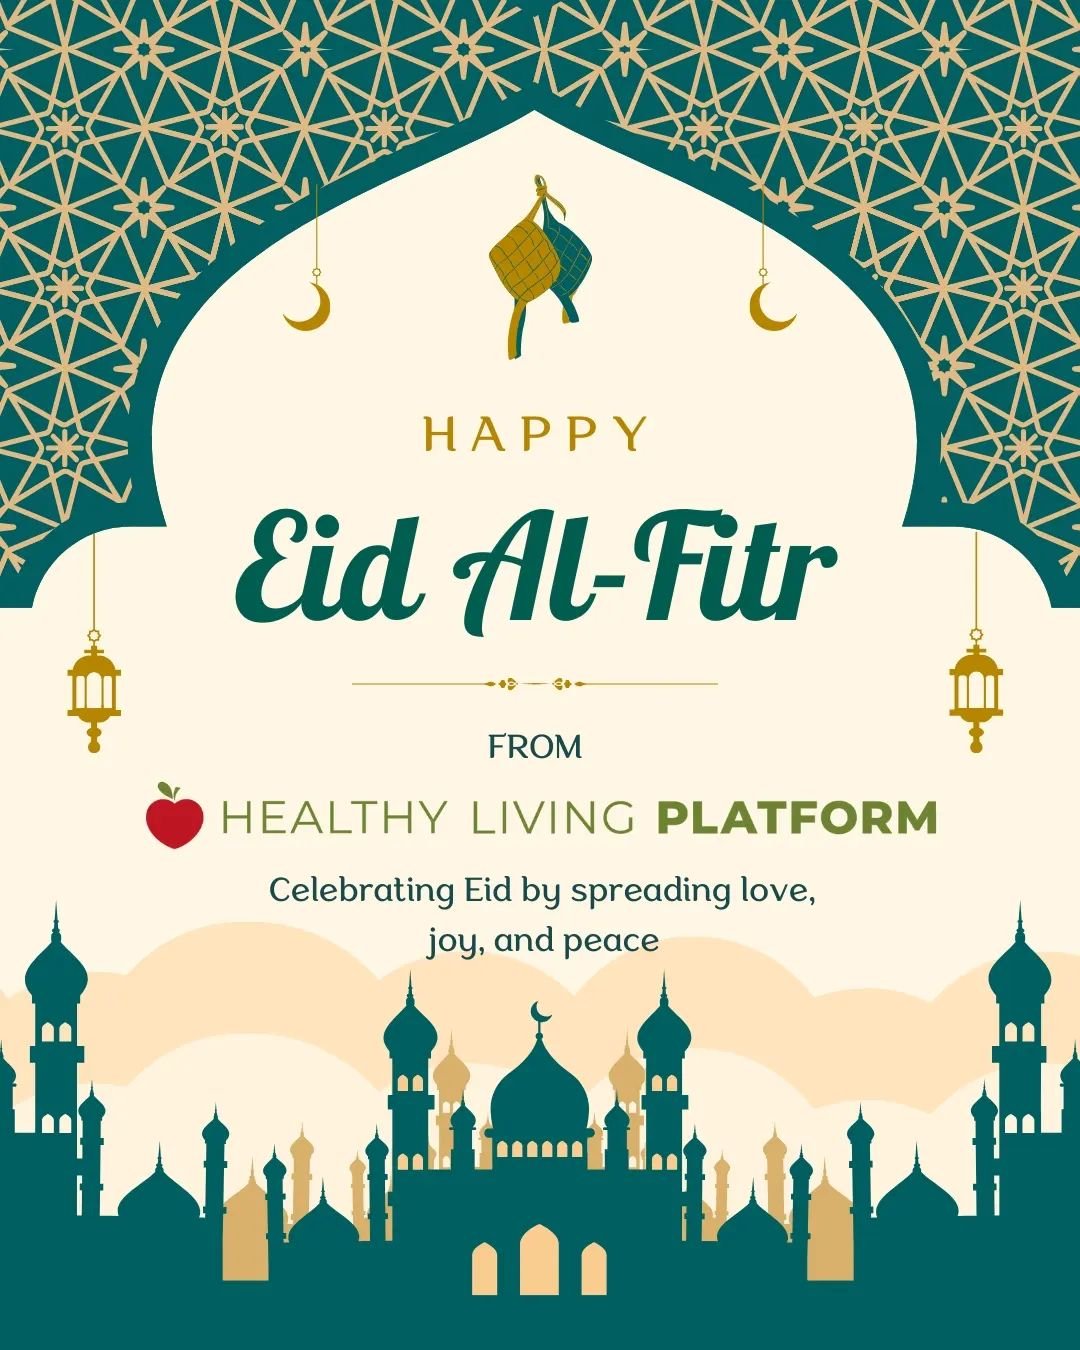 Wishing everyone celebrating, Eid Mubarak! ☪️
From Healthy Living Platform 🍎

If you're looking for recipes to cook today, check our our recipes page on our website (link in bio)